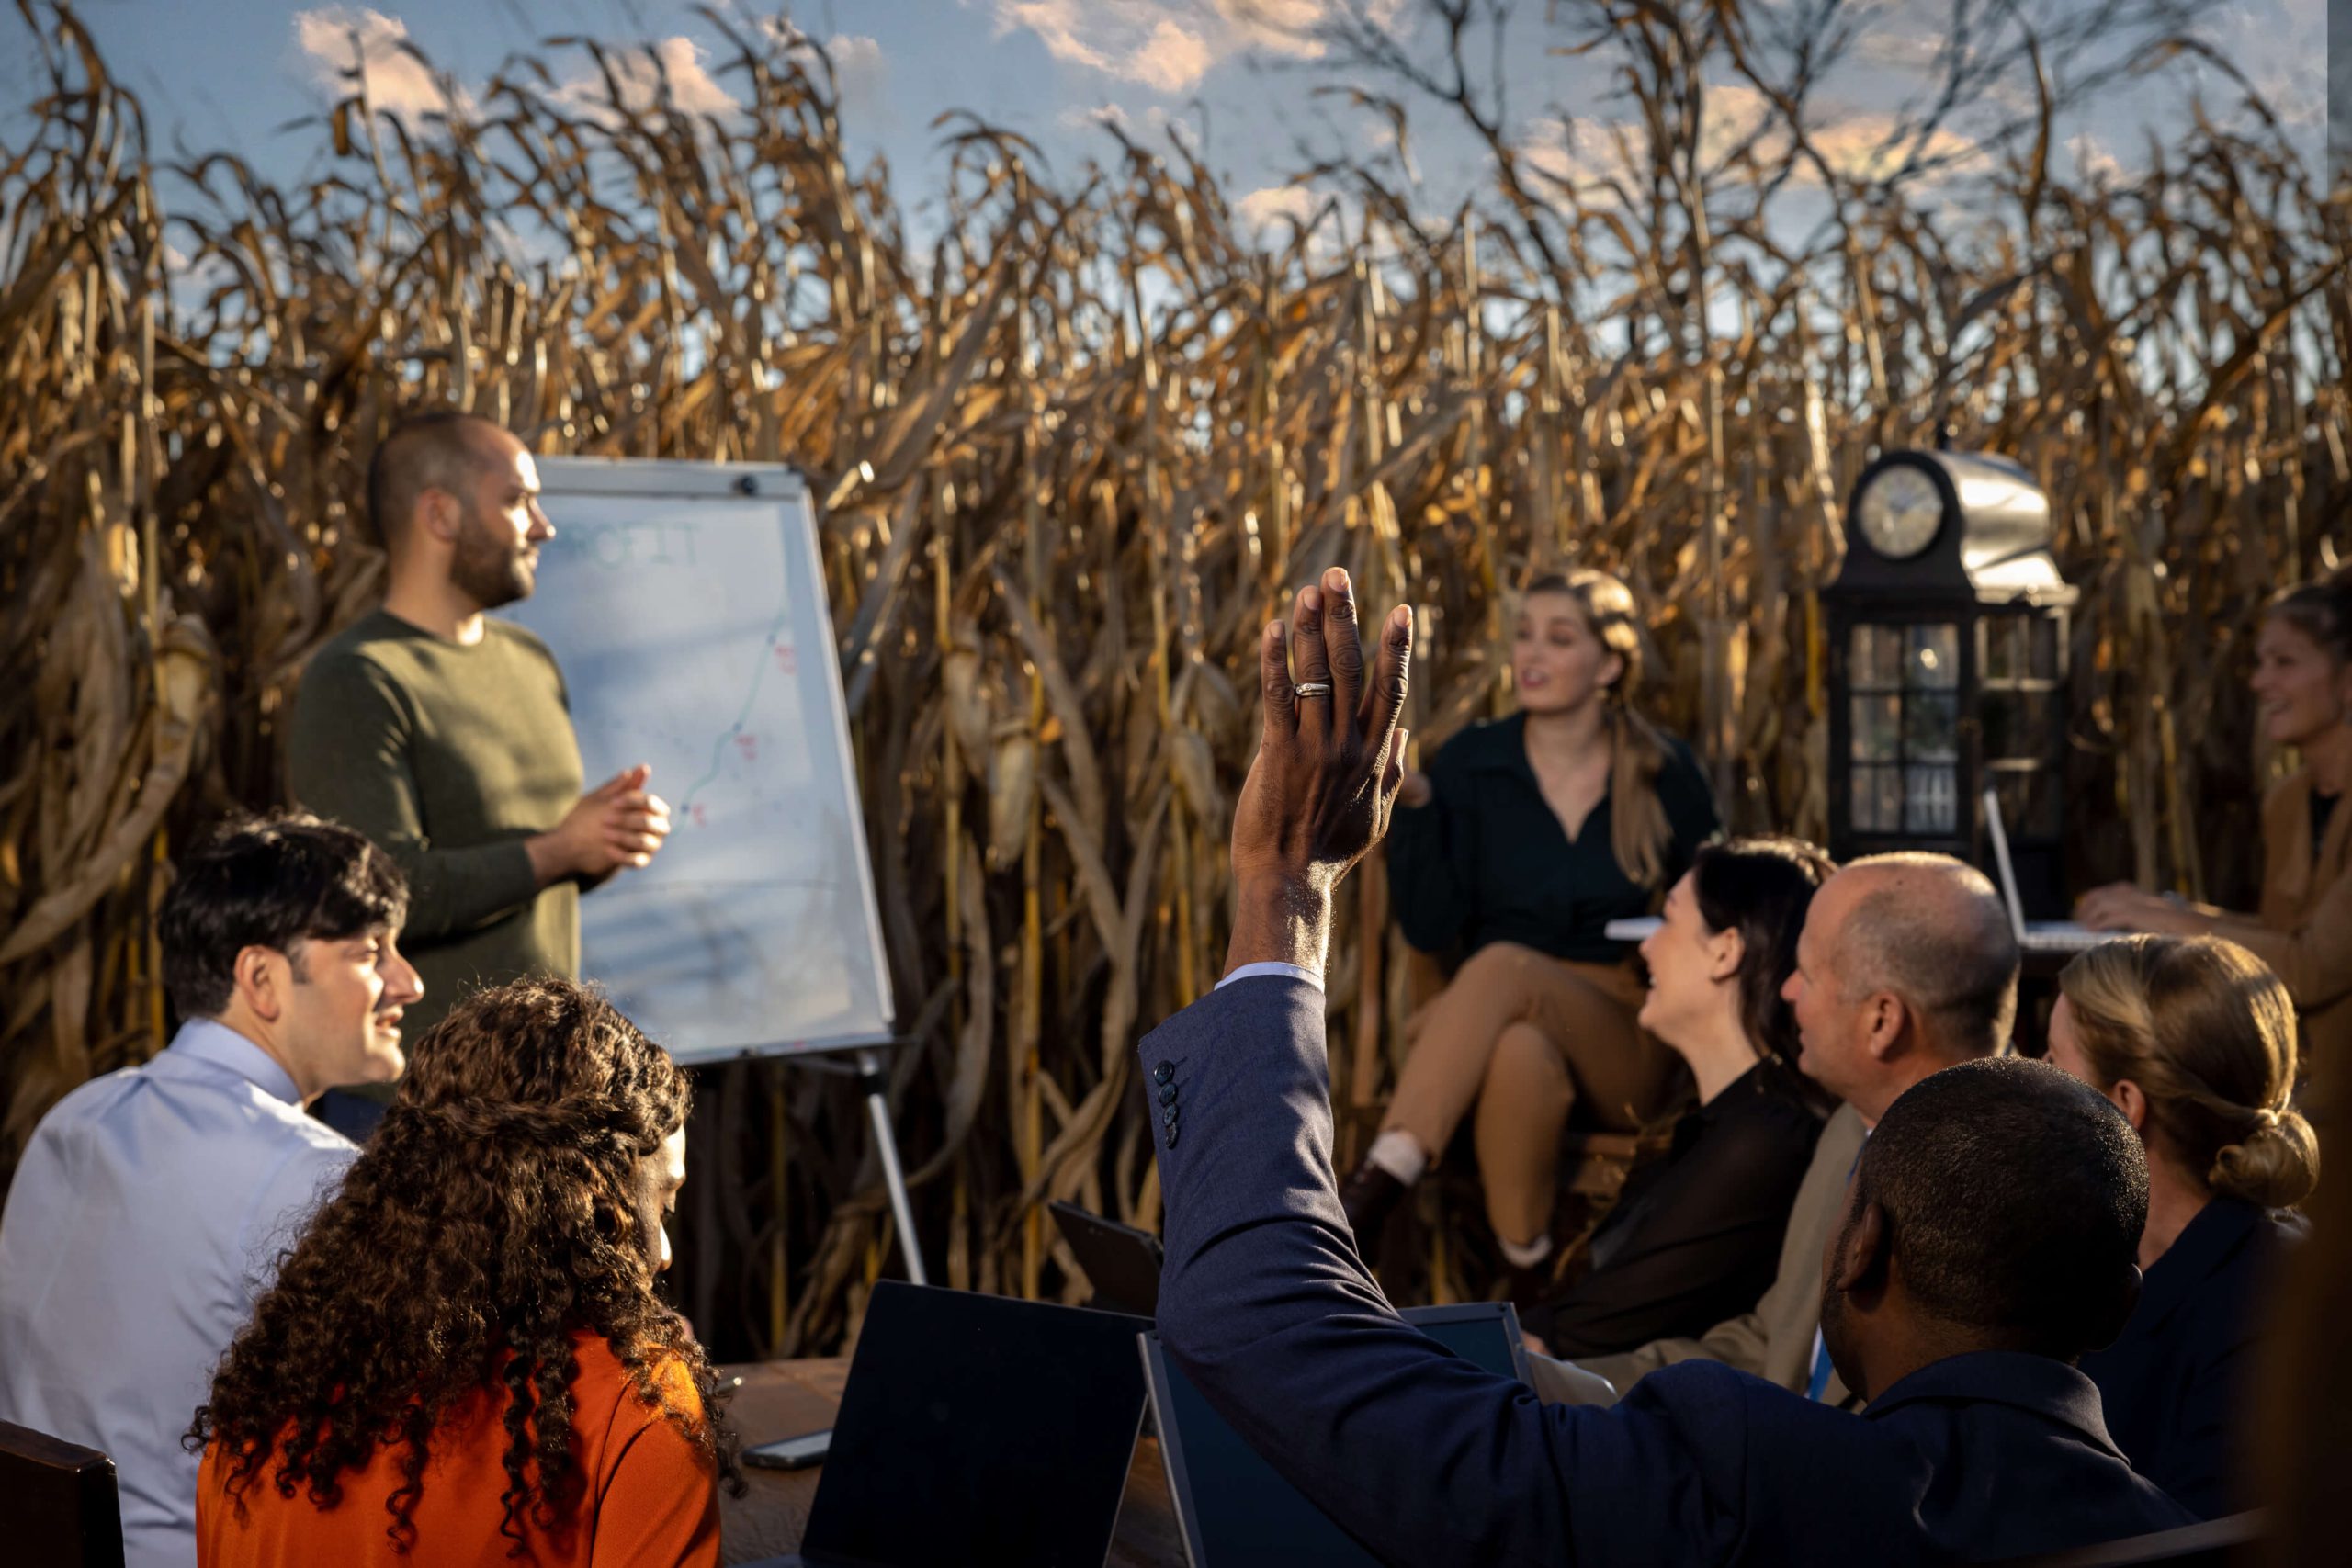 raising a hand during group conversation in a cornfield